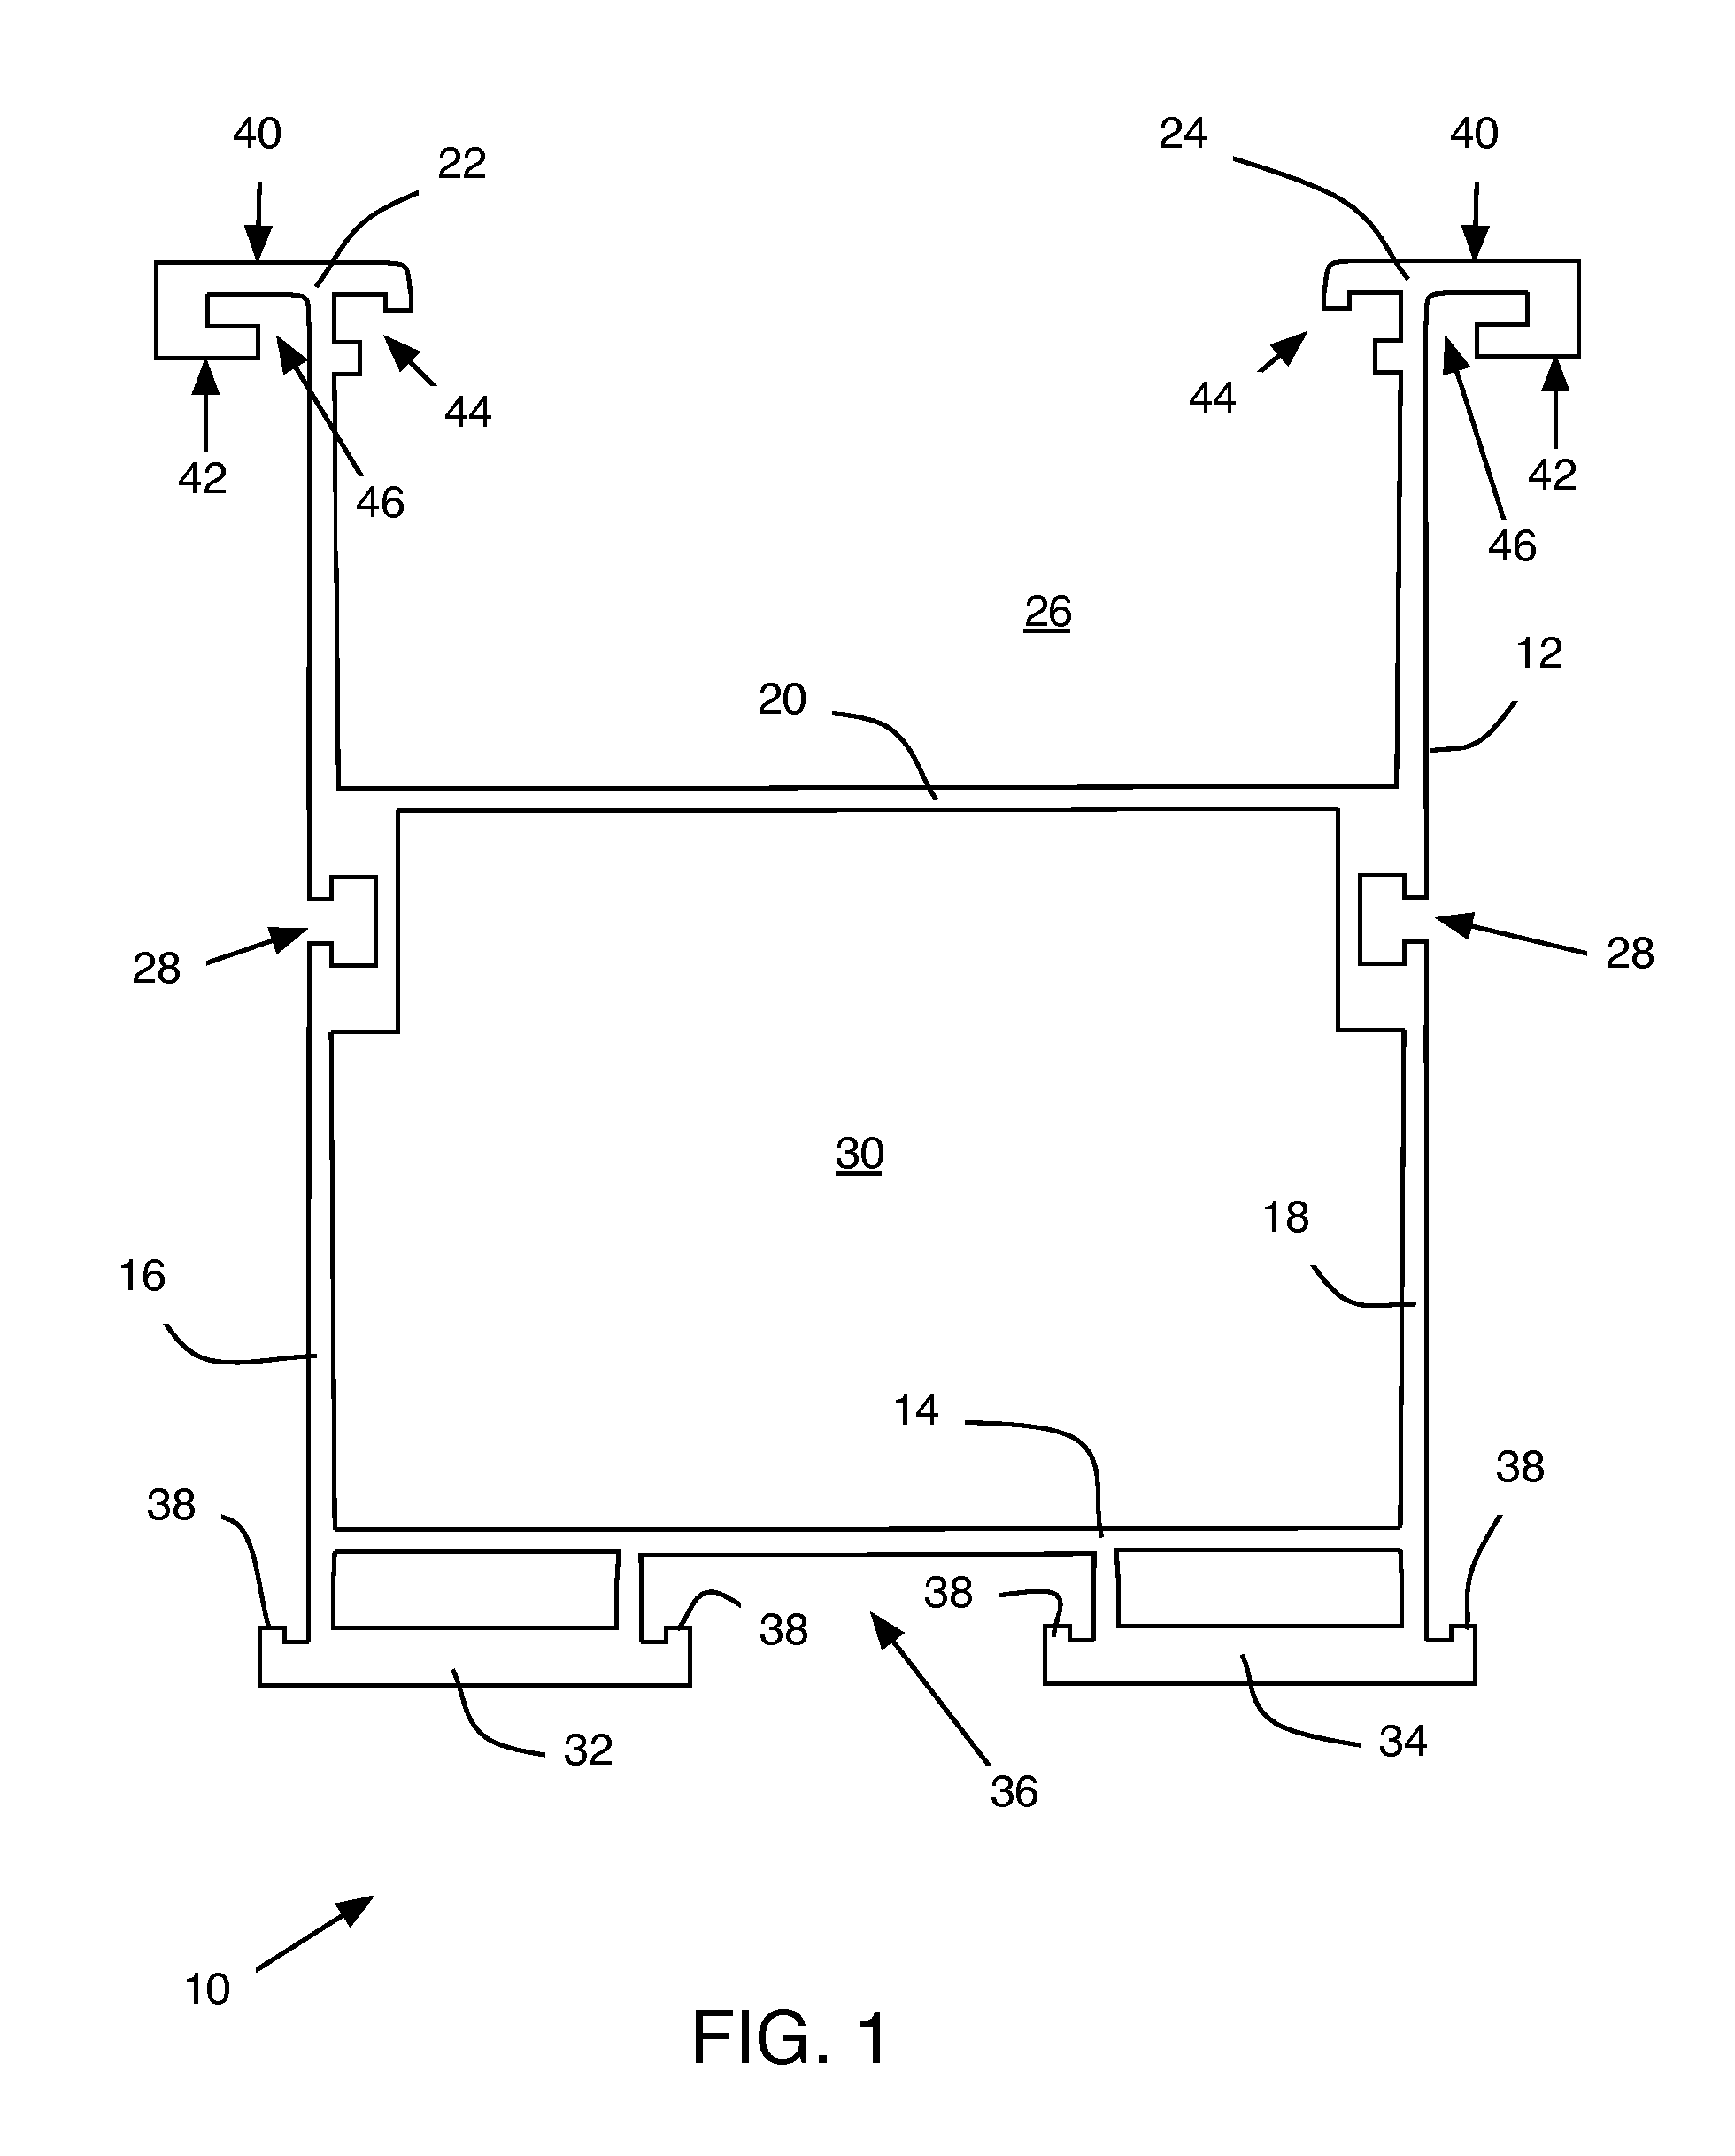 Building integrated solar array support structure device, system, and method